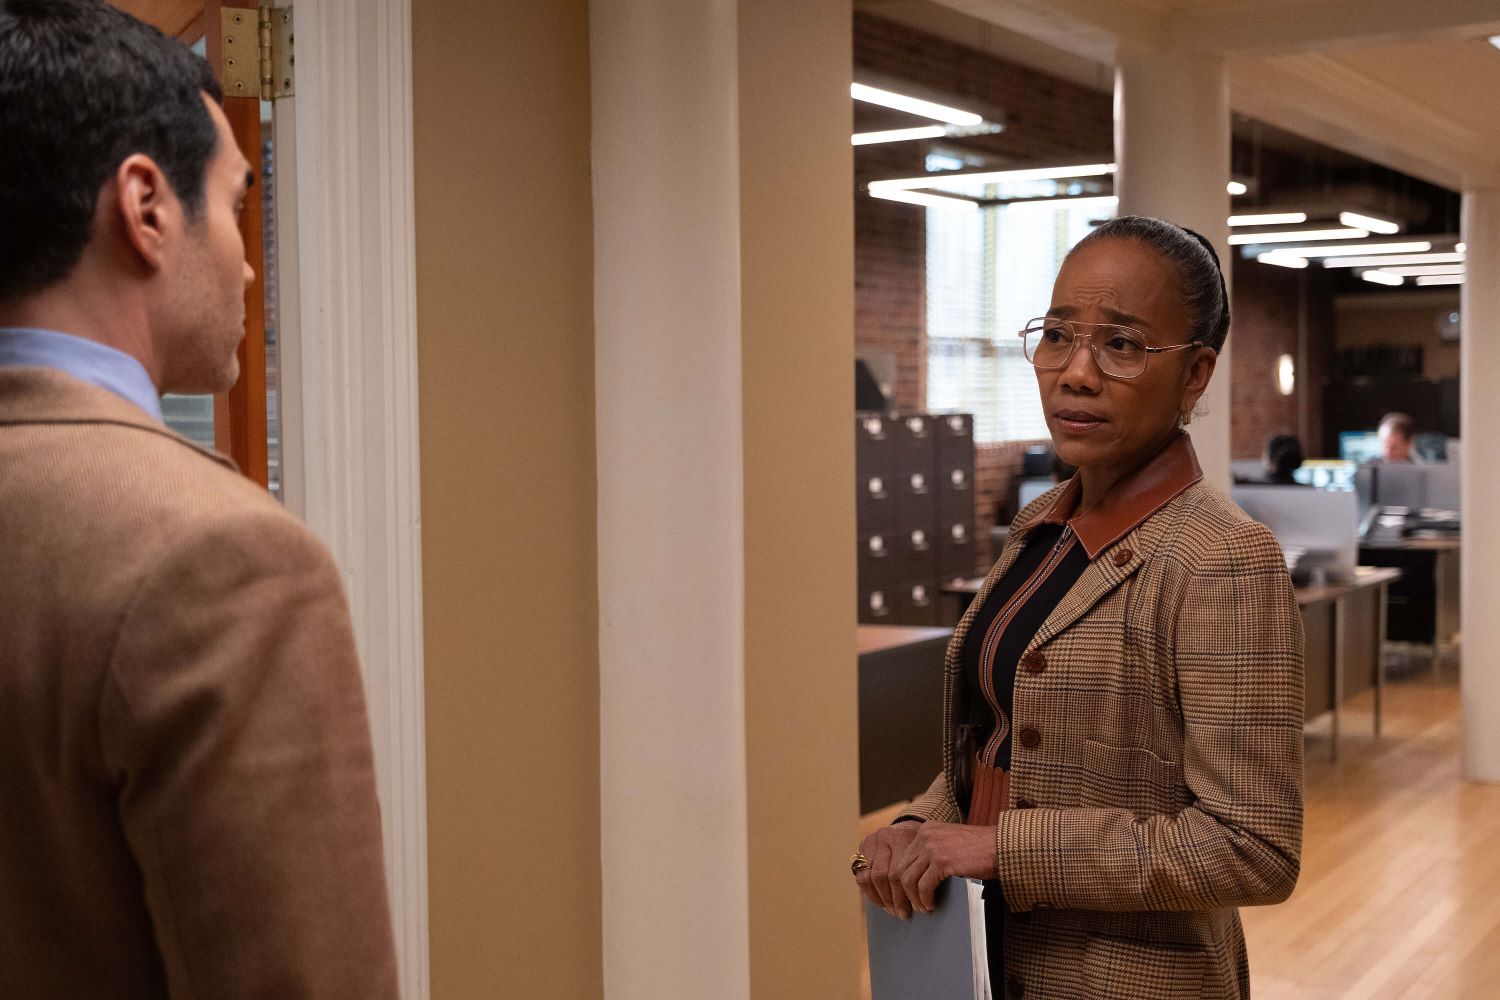 Sonja Sohn, in character as Amanda Wagner in 'Will Trent' Season 1 Episode 10, wears a tan plaid coat over a black and brown collared sweater.